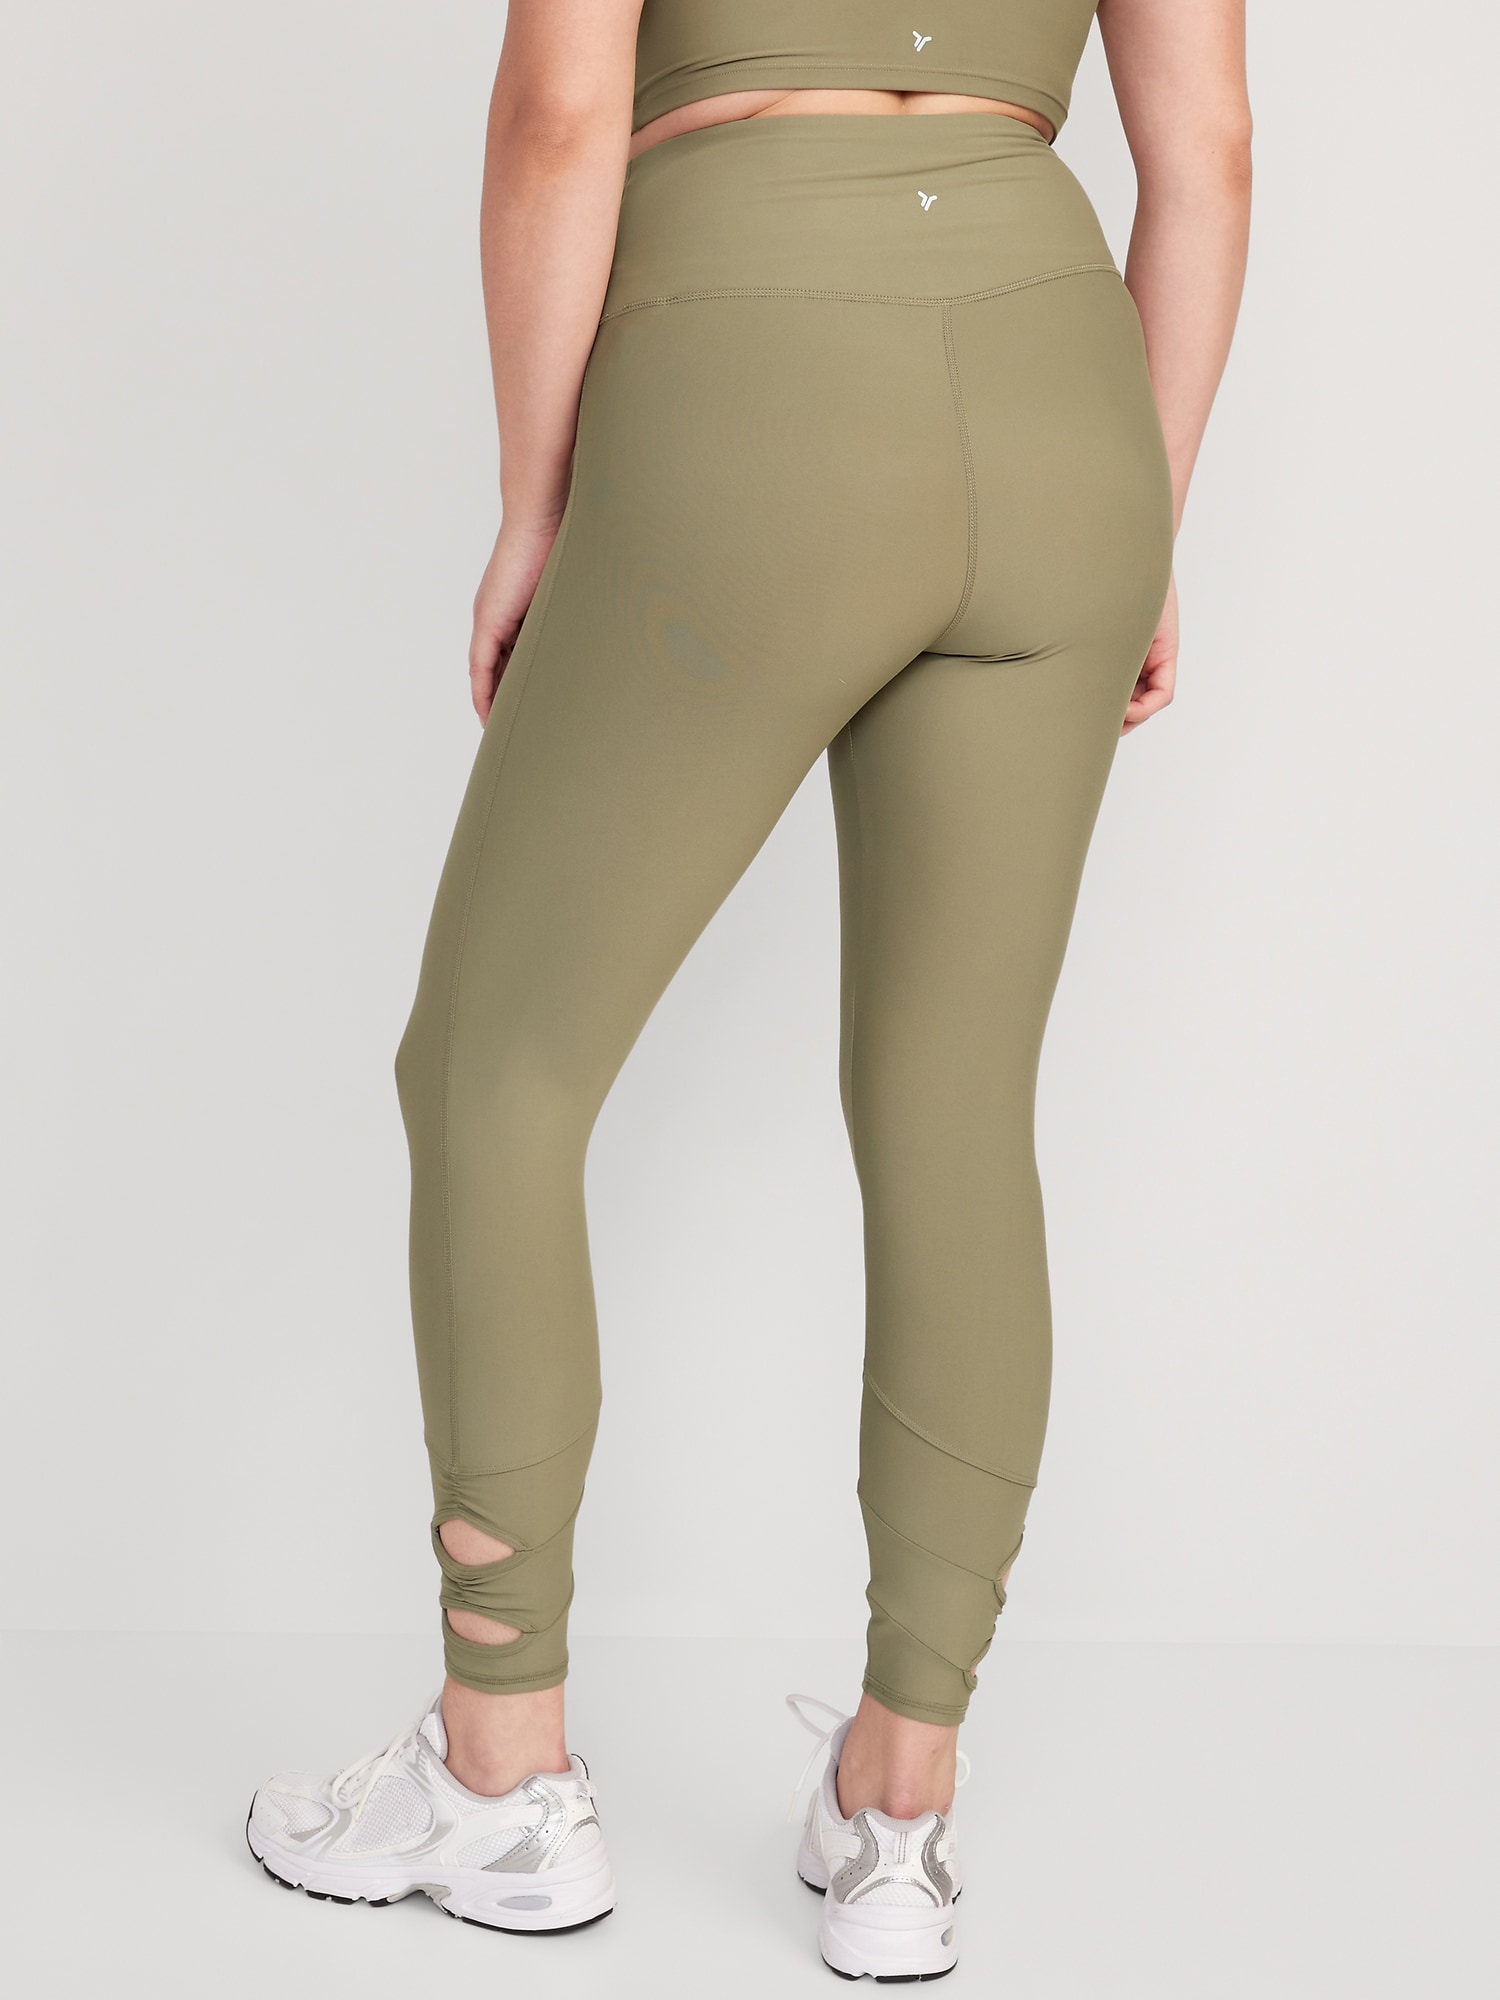 Old Navy High-Waisted PowerSoft 7/8 Leggings for Women, Old Navy deals  this week, Old Navy flyer